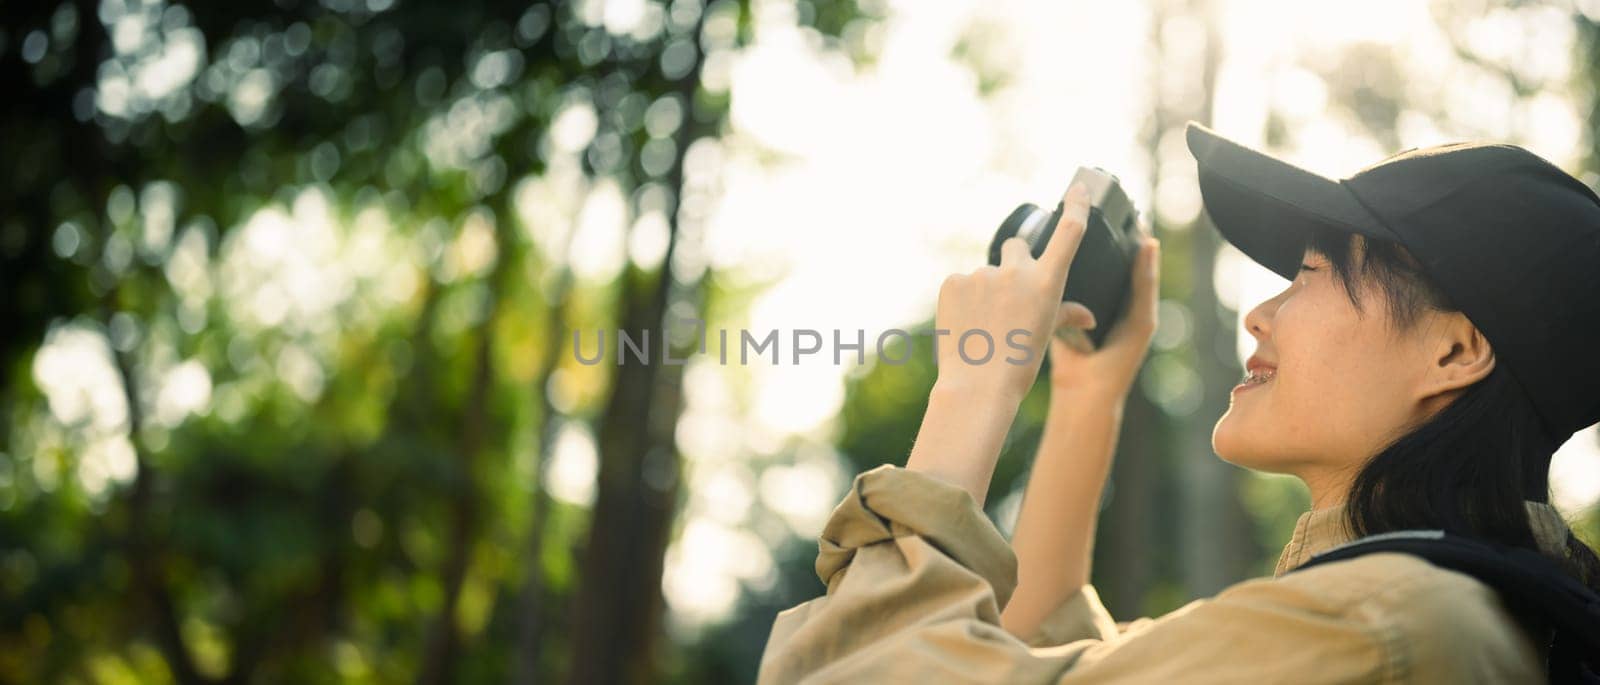 Panoramic photo of smiling female traveller taking photo with camera in nature. Holiday, travel and lifestyle concept.